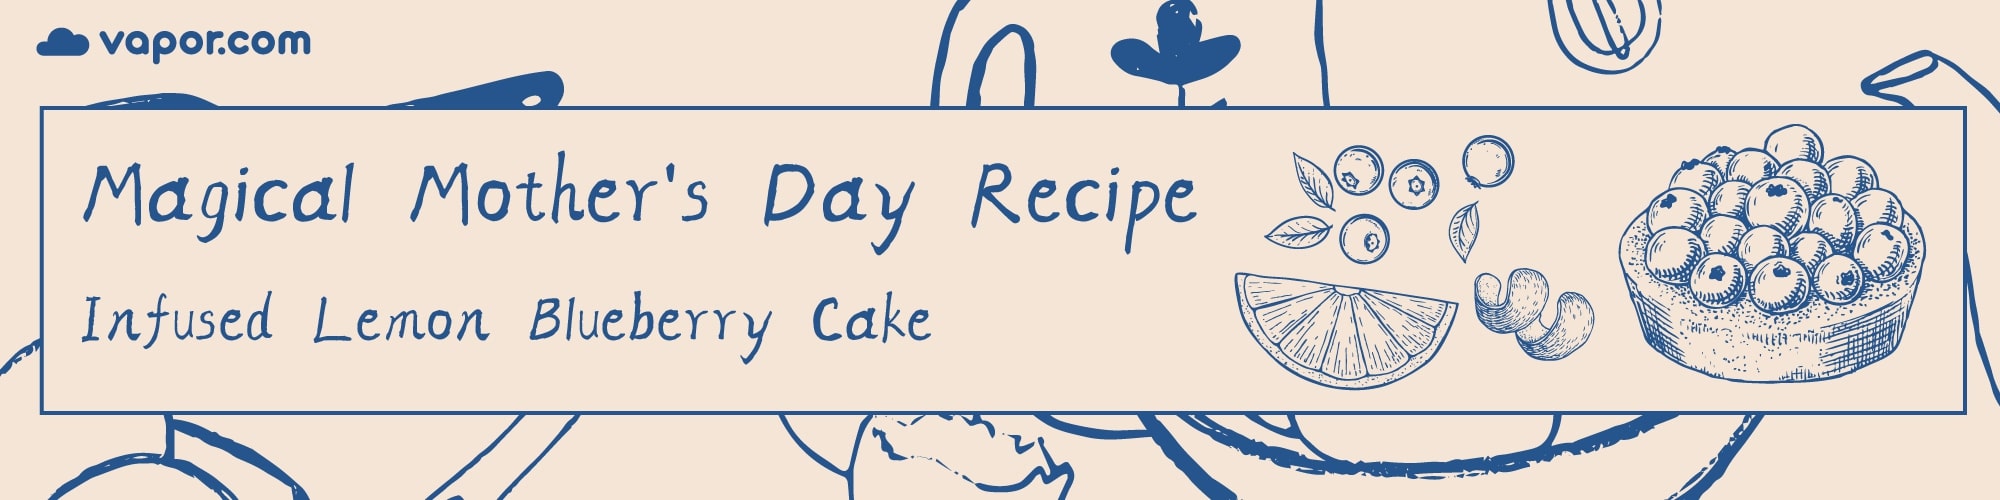 Magical Mother's Day Recipe: Infused Lemon Blueberry Cake